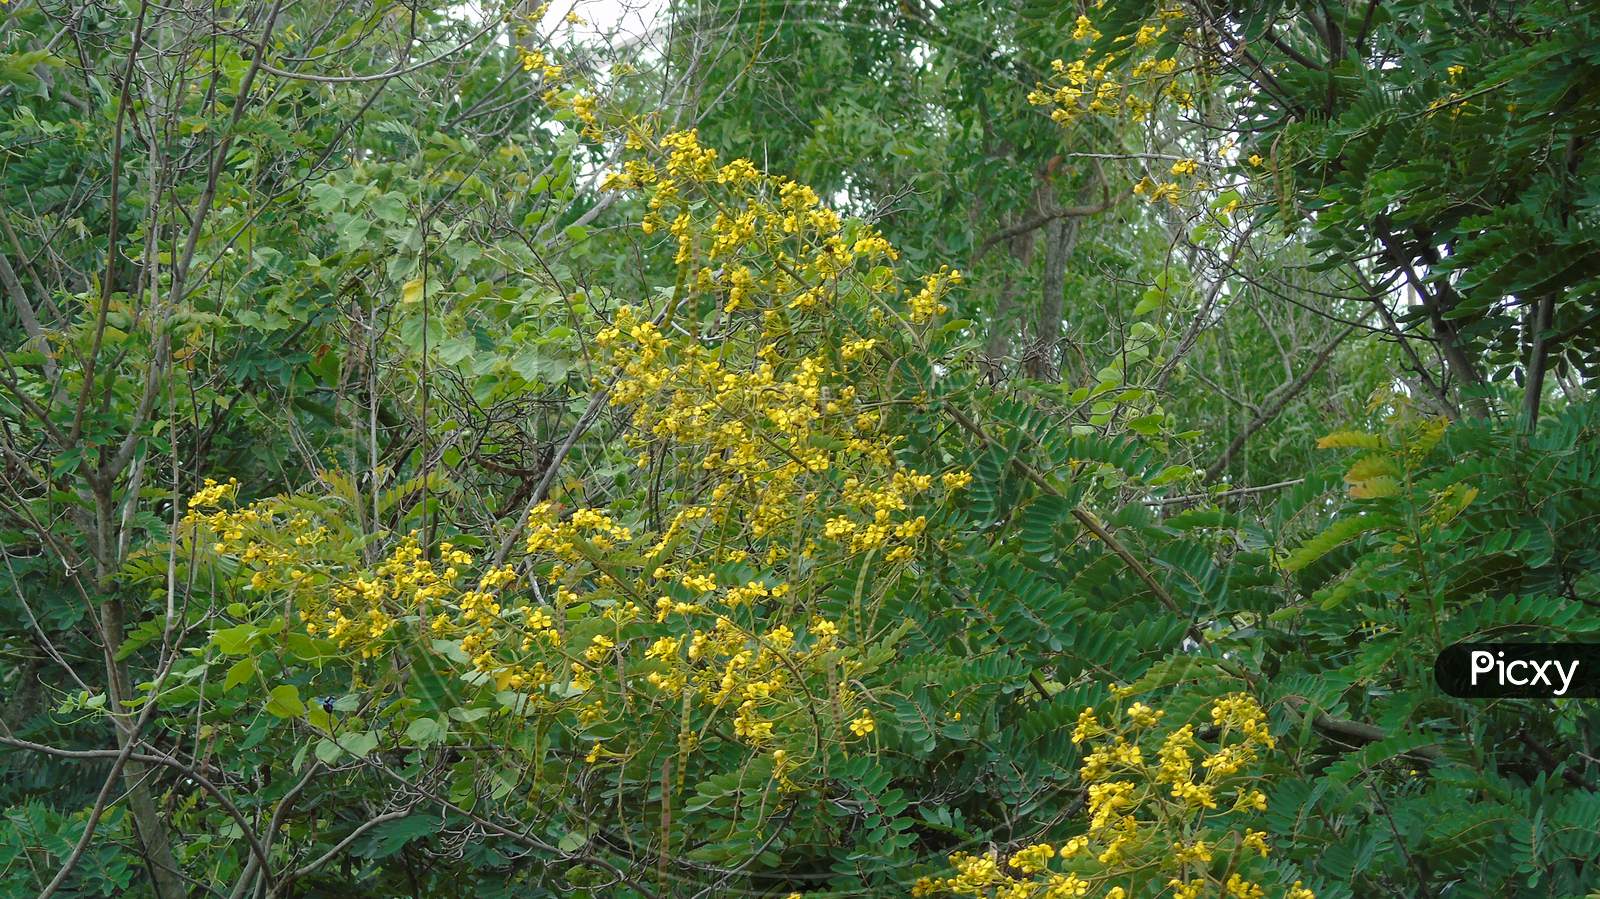 green flowering plant with yellow flower